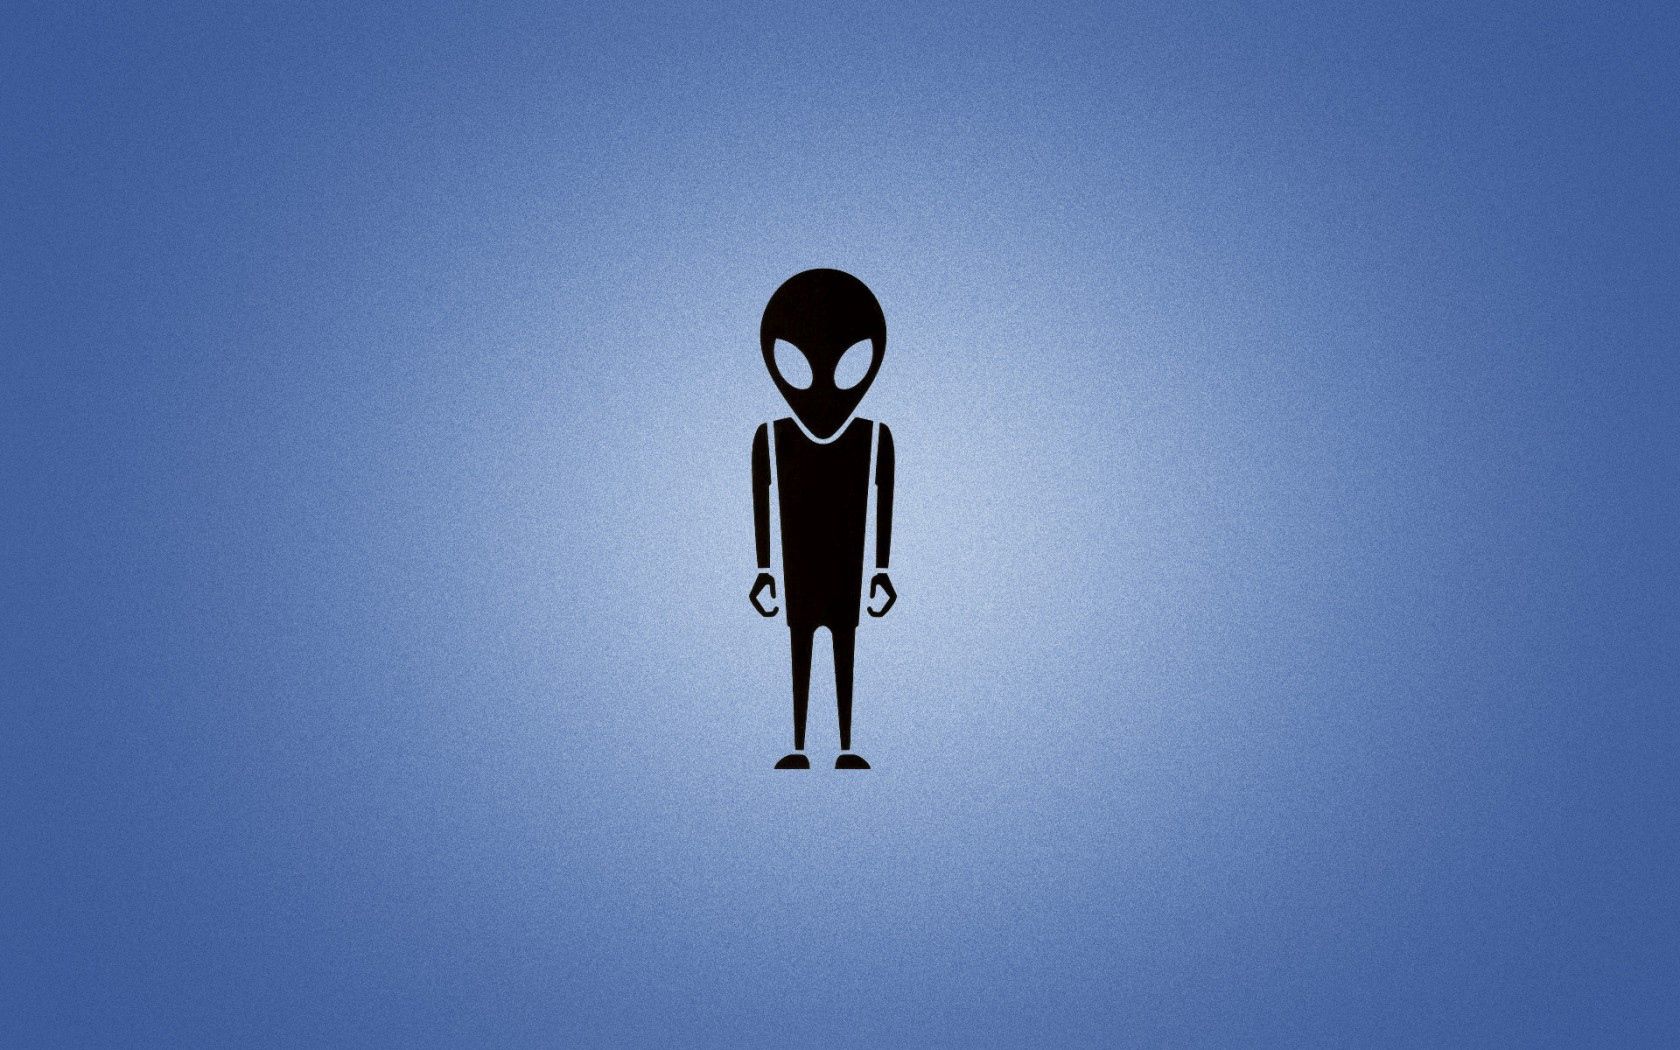 86952 download wallpaper vector, stranger, alien, black, minimalism, glow, blue background screensavers and pictures for free